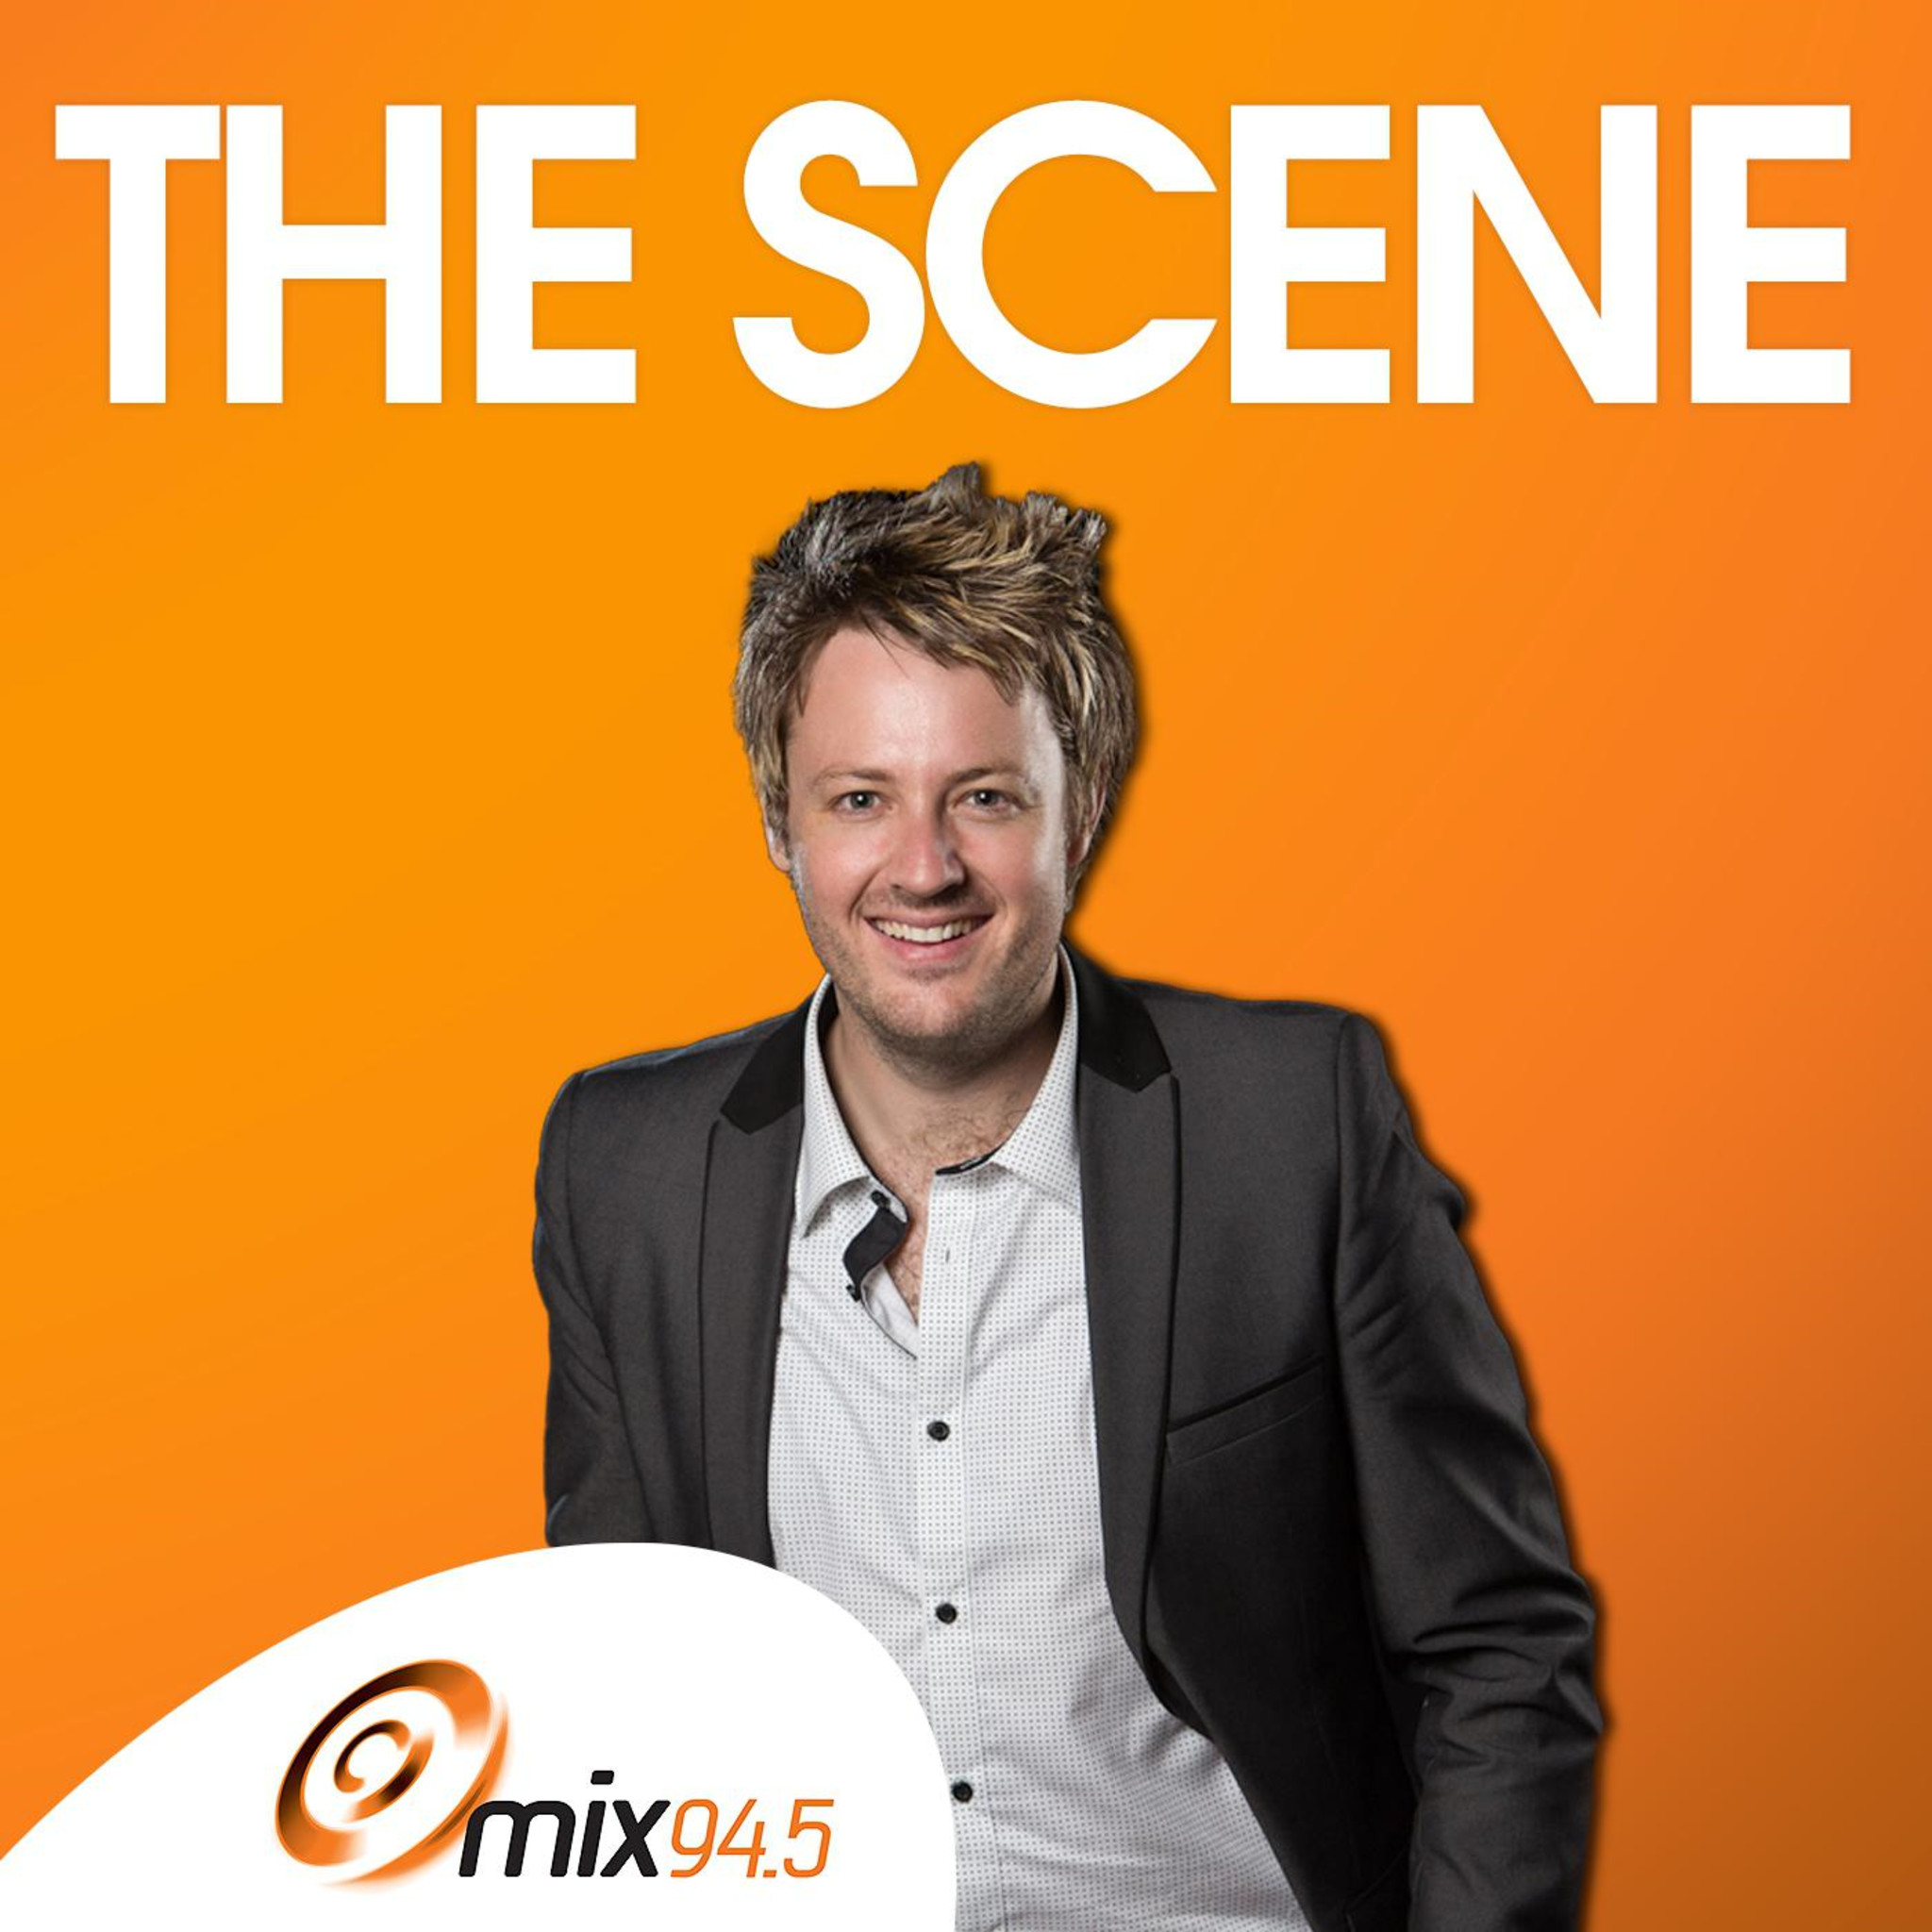 #thescene / Show 278 / Little Lord St Band / NAIDOC Music Awards